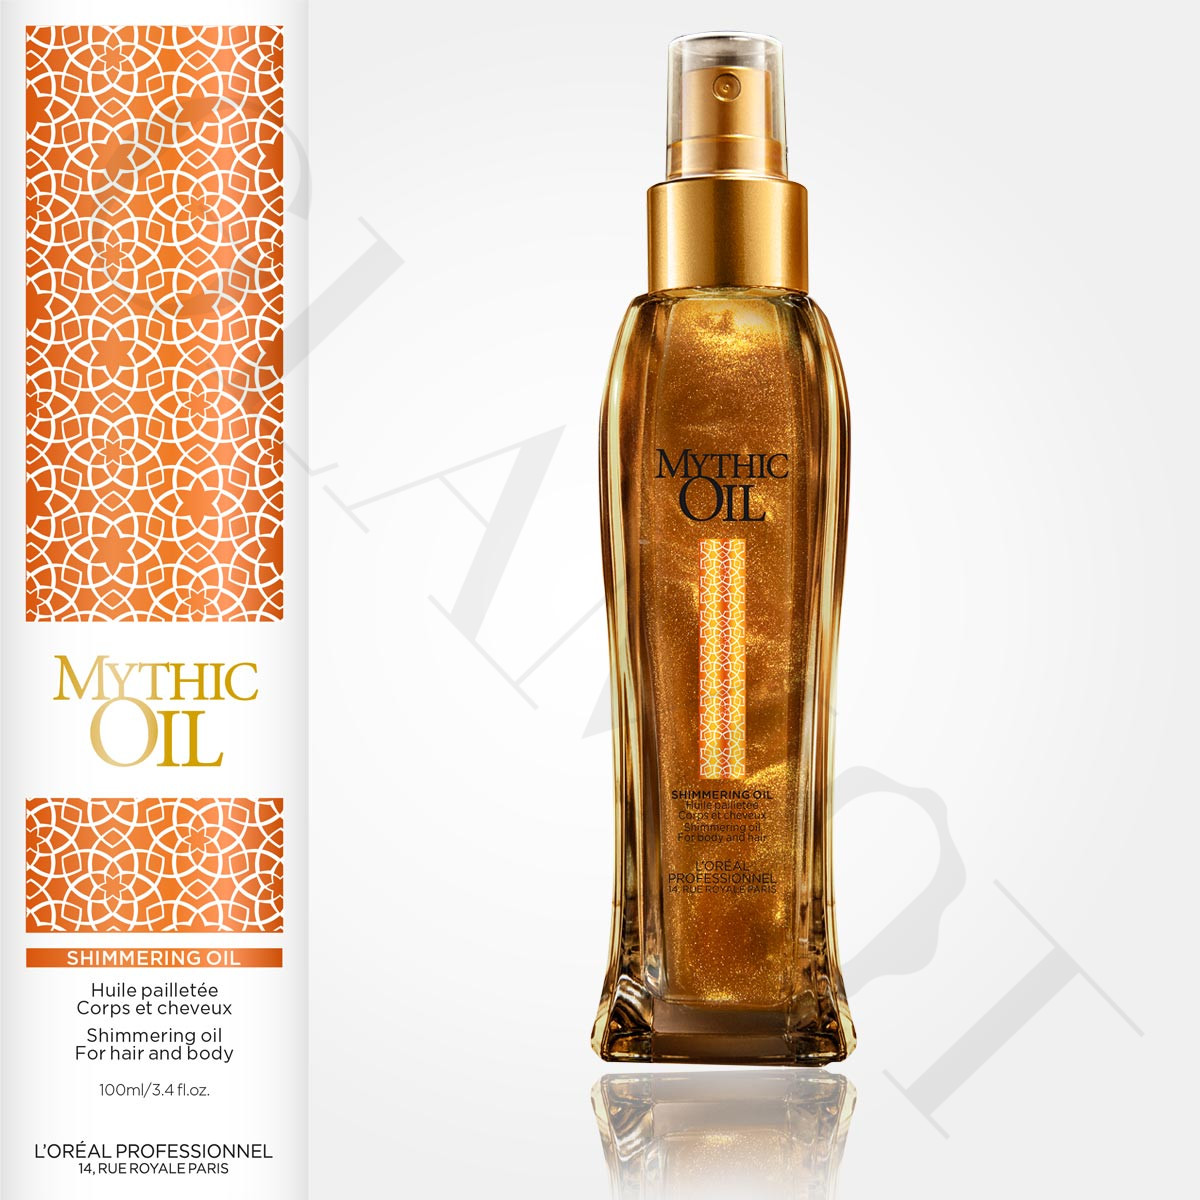 L'oreal Hair Oil - L'Oreal Mythic Oil Shampoo for thick hair oils : Get